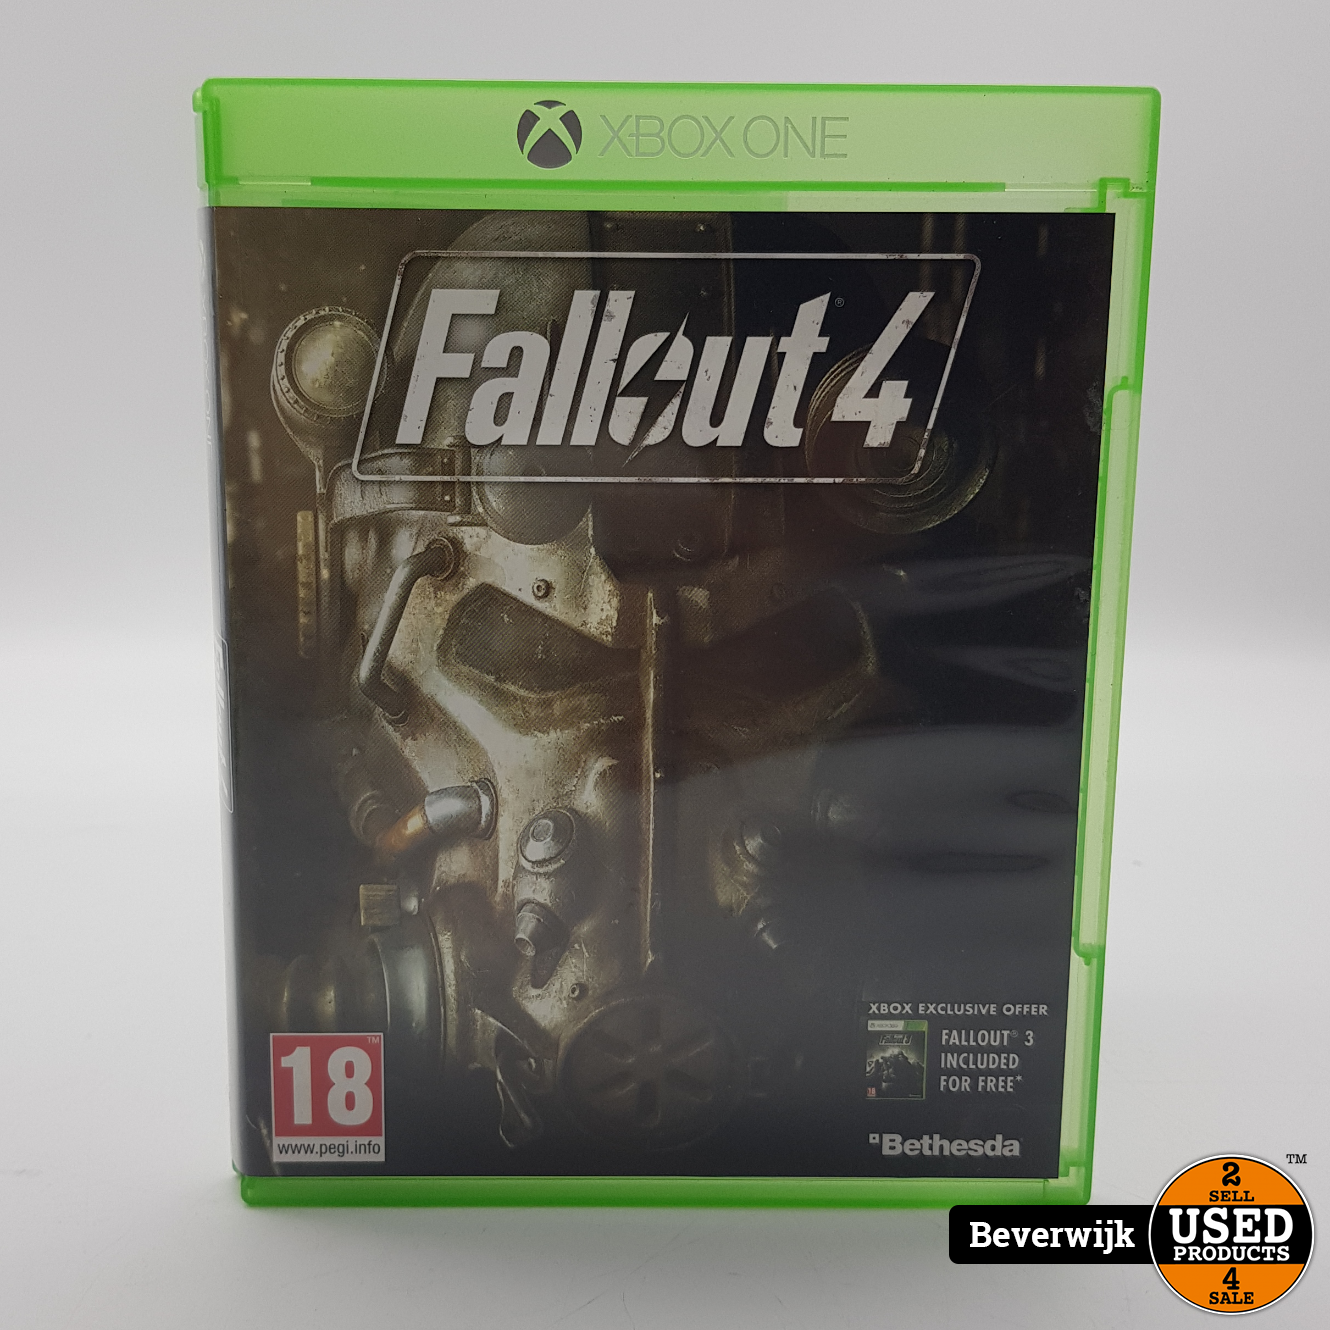 Xbox Fallout Microsoft One Game - In Nette Staat Used Products Beverwijk